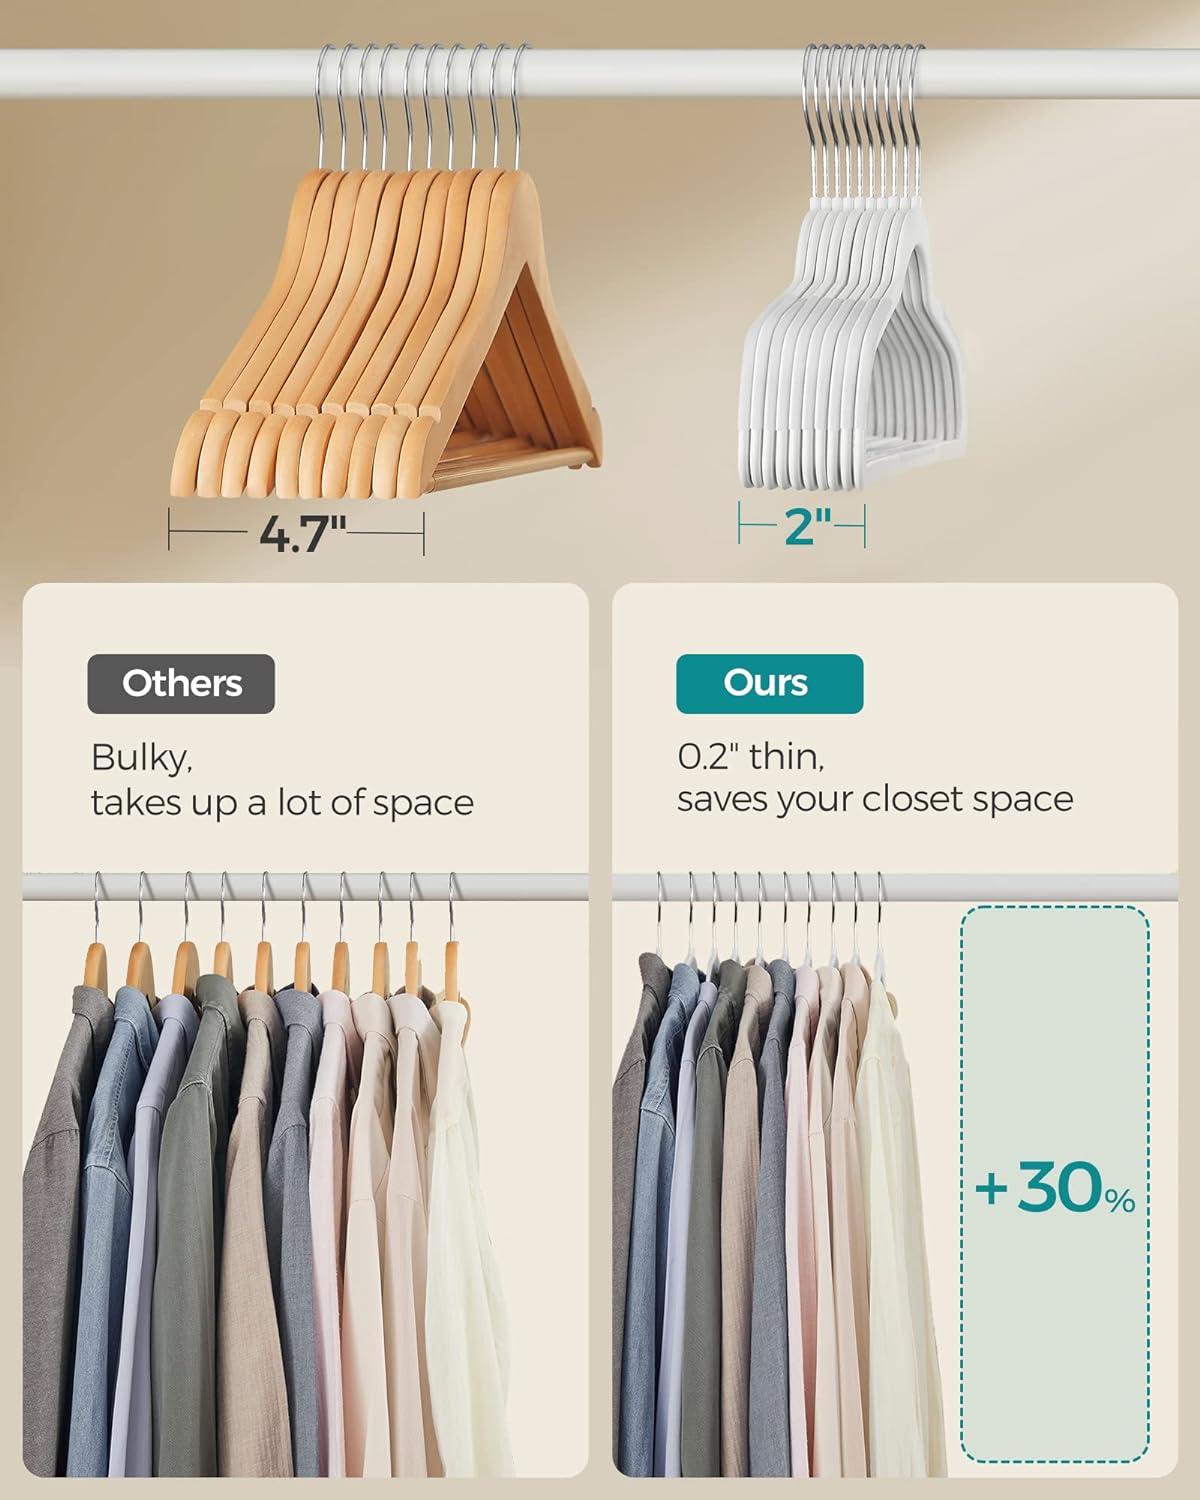 https://bigbigmart.com/wp-content/uploads/2023/12/SONGMICS-Clothes-Hangers-Pack-of-50-Plastic-Coat-Hangers-Non-Slip-Space-Saving-0.2-Inches-Thick-17.7-Inches-Long-360%C2%B0-Swivel-Hook-White-UCRP050W056.jpg